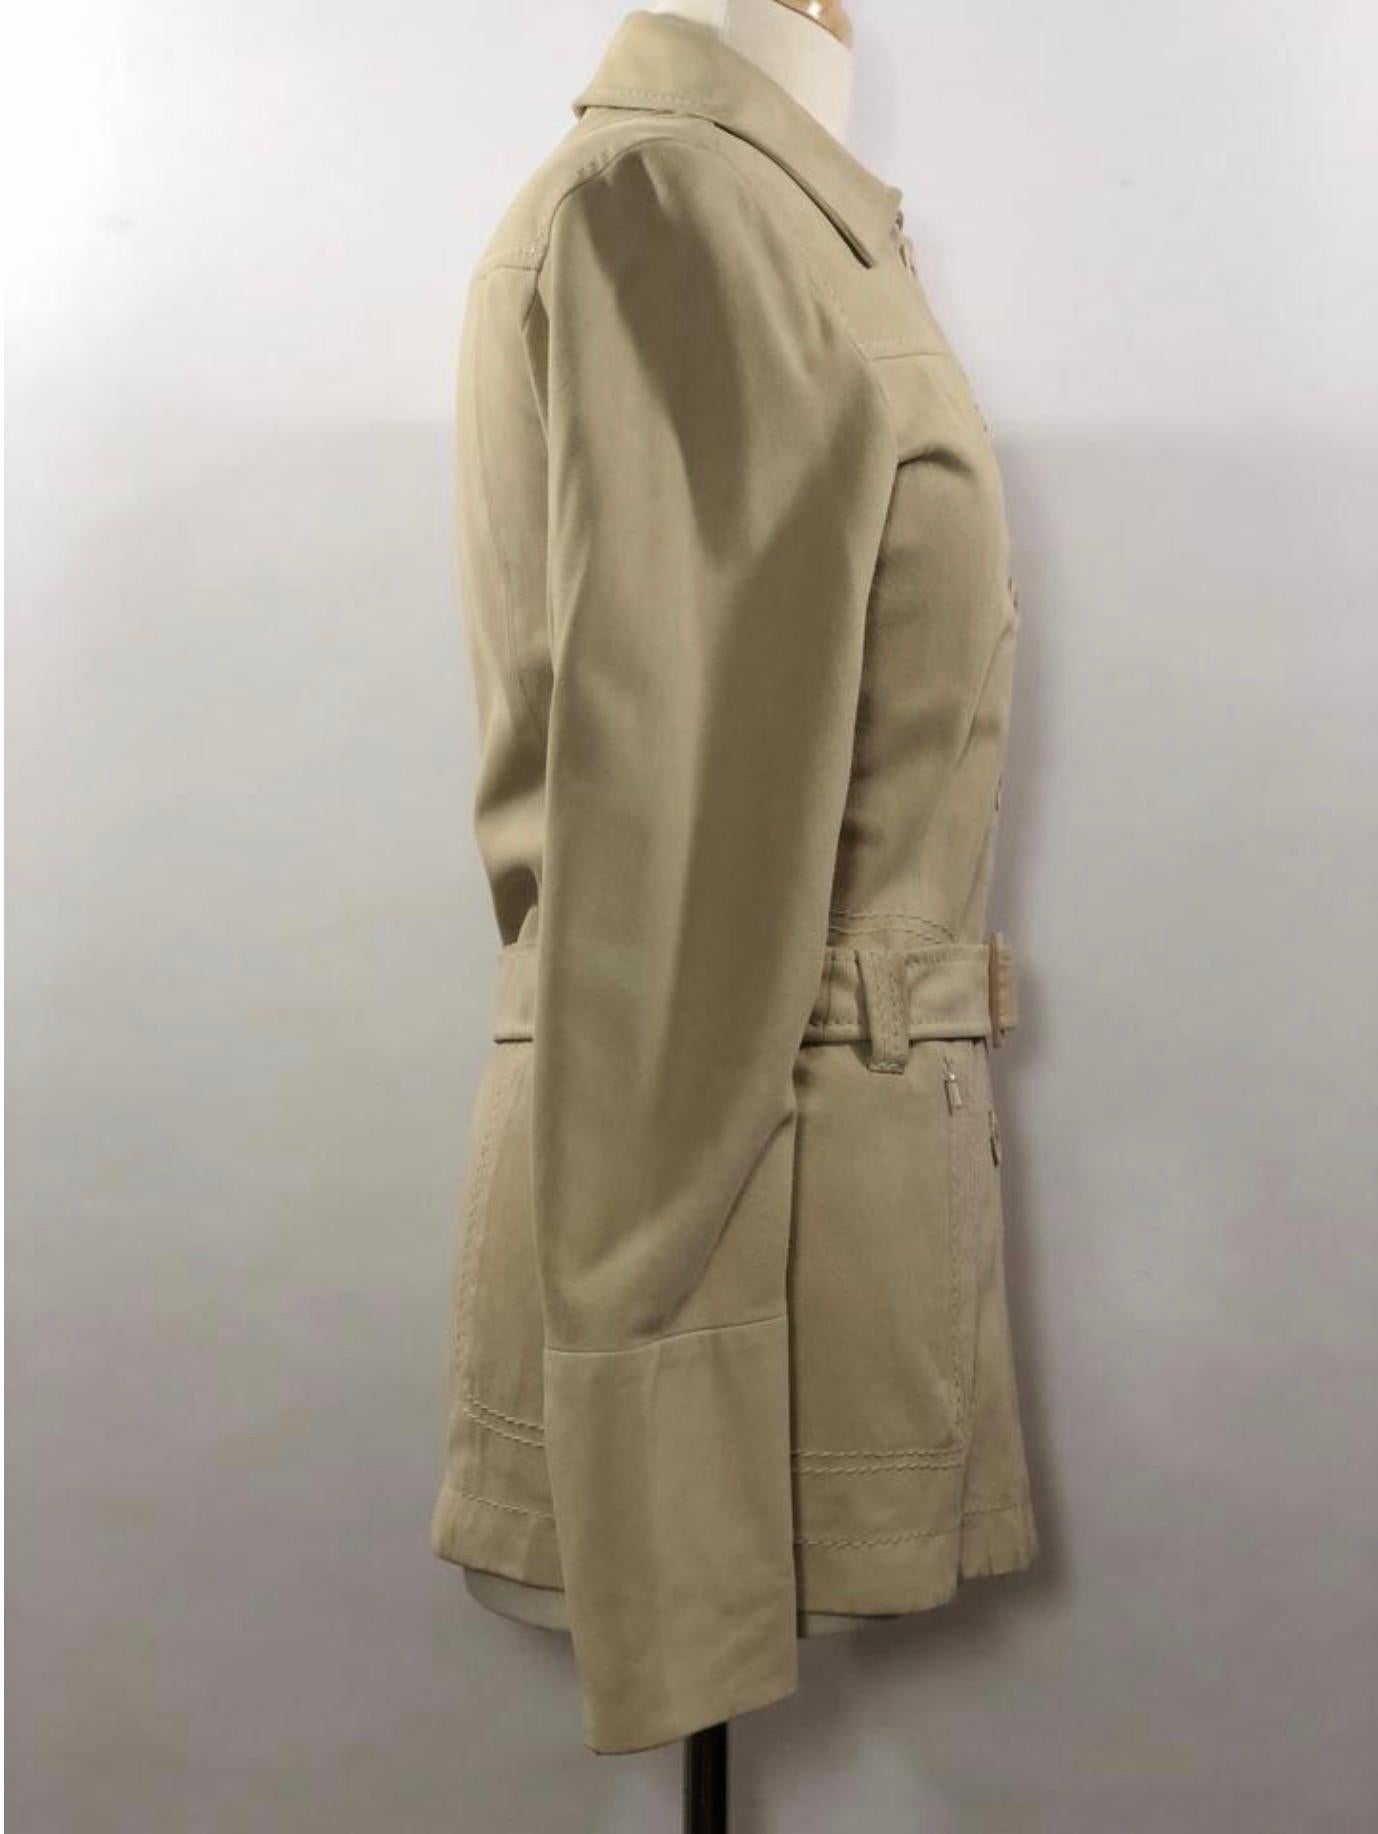 Brown Faconnable Goatskin Fall or Spring Jacket with Belt For Sale